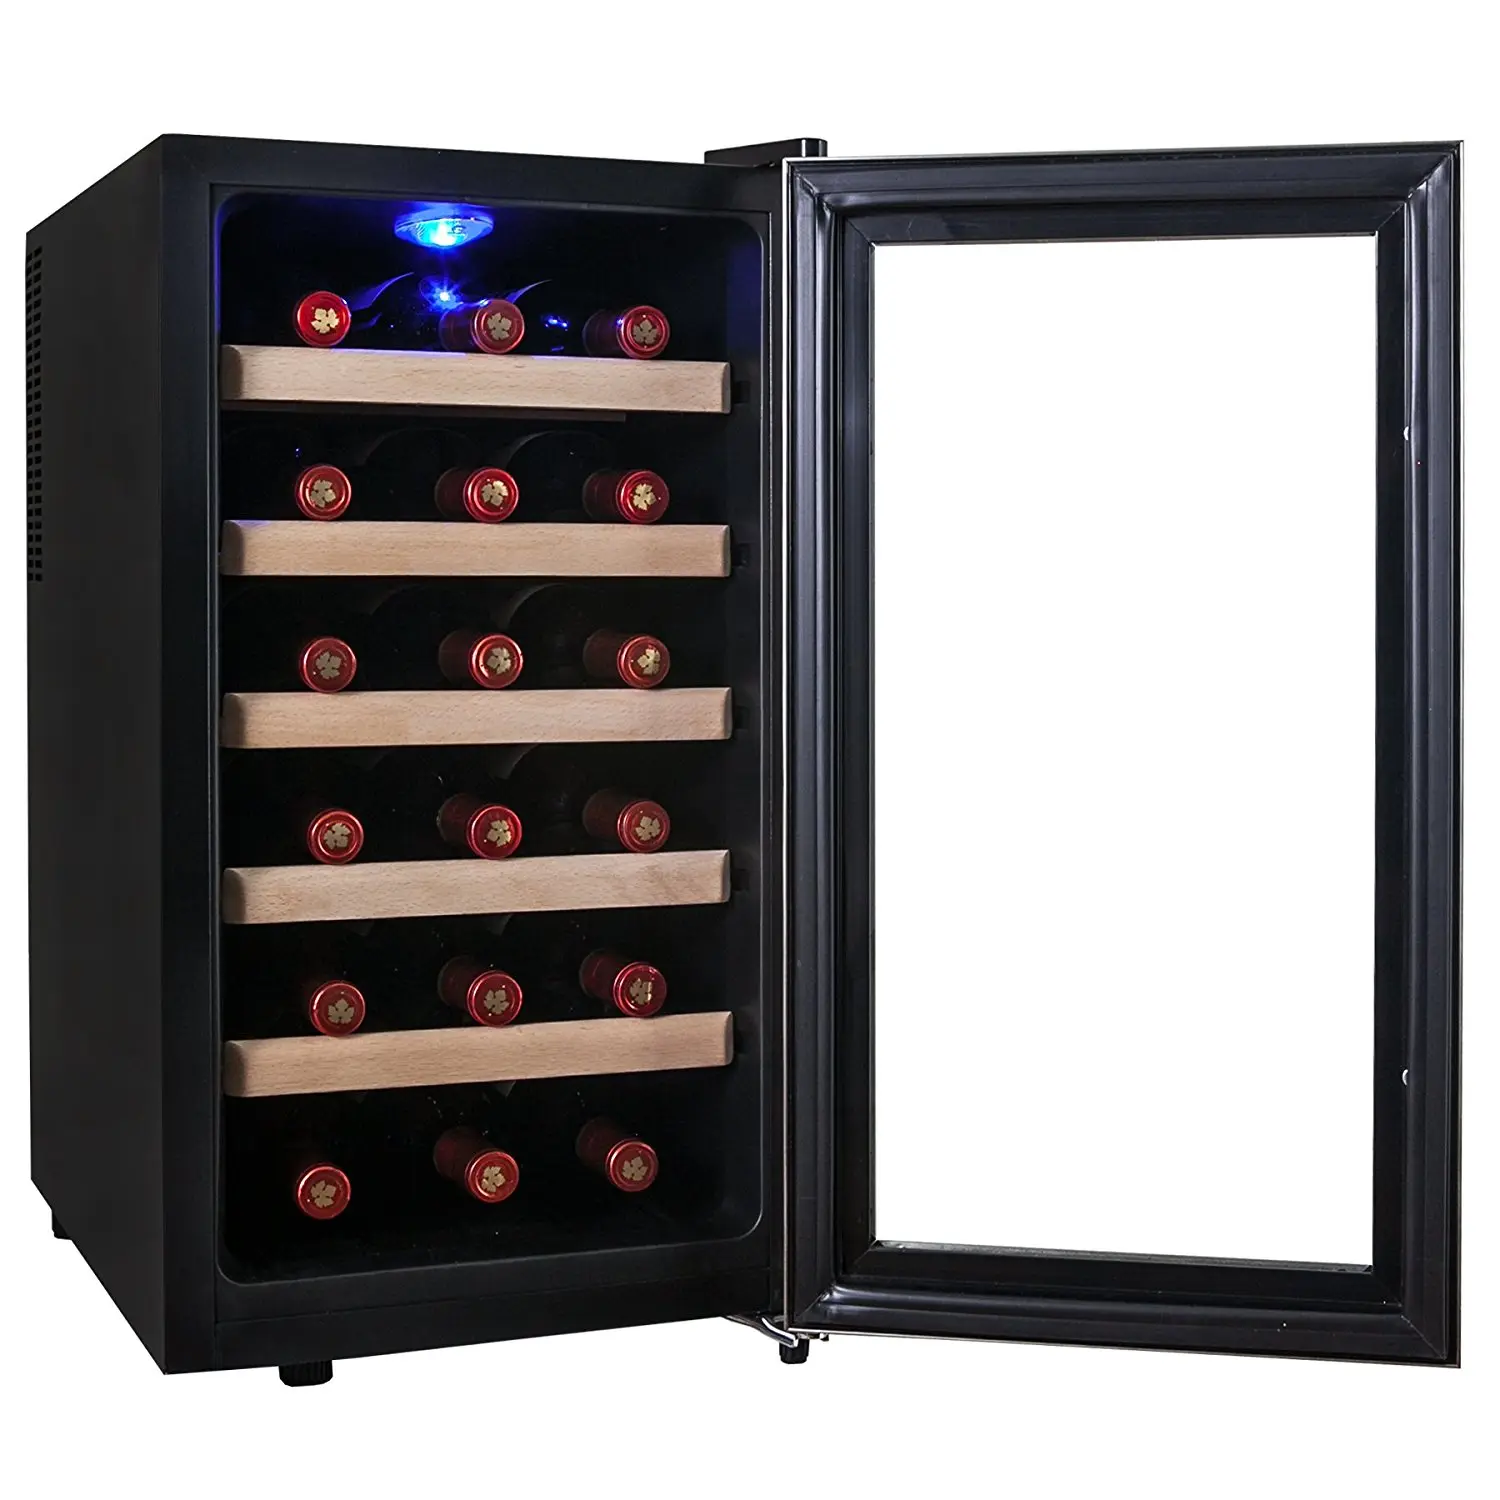 Yuebang Glass: Premier Supplier of Beverage Cooler and Wine Cabinet Glass Doors